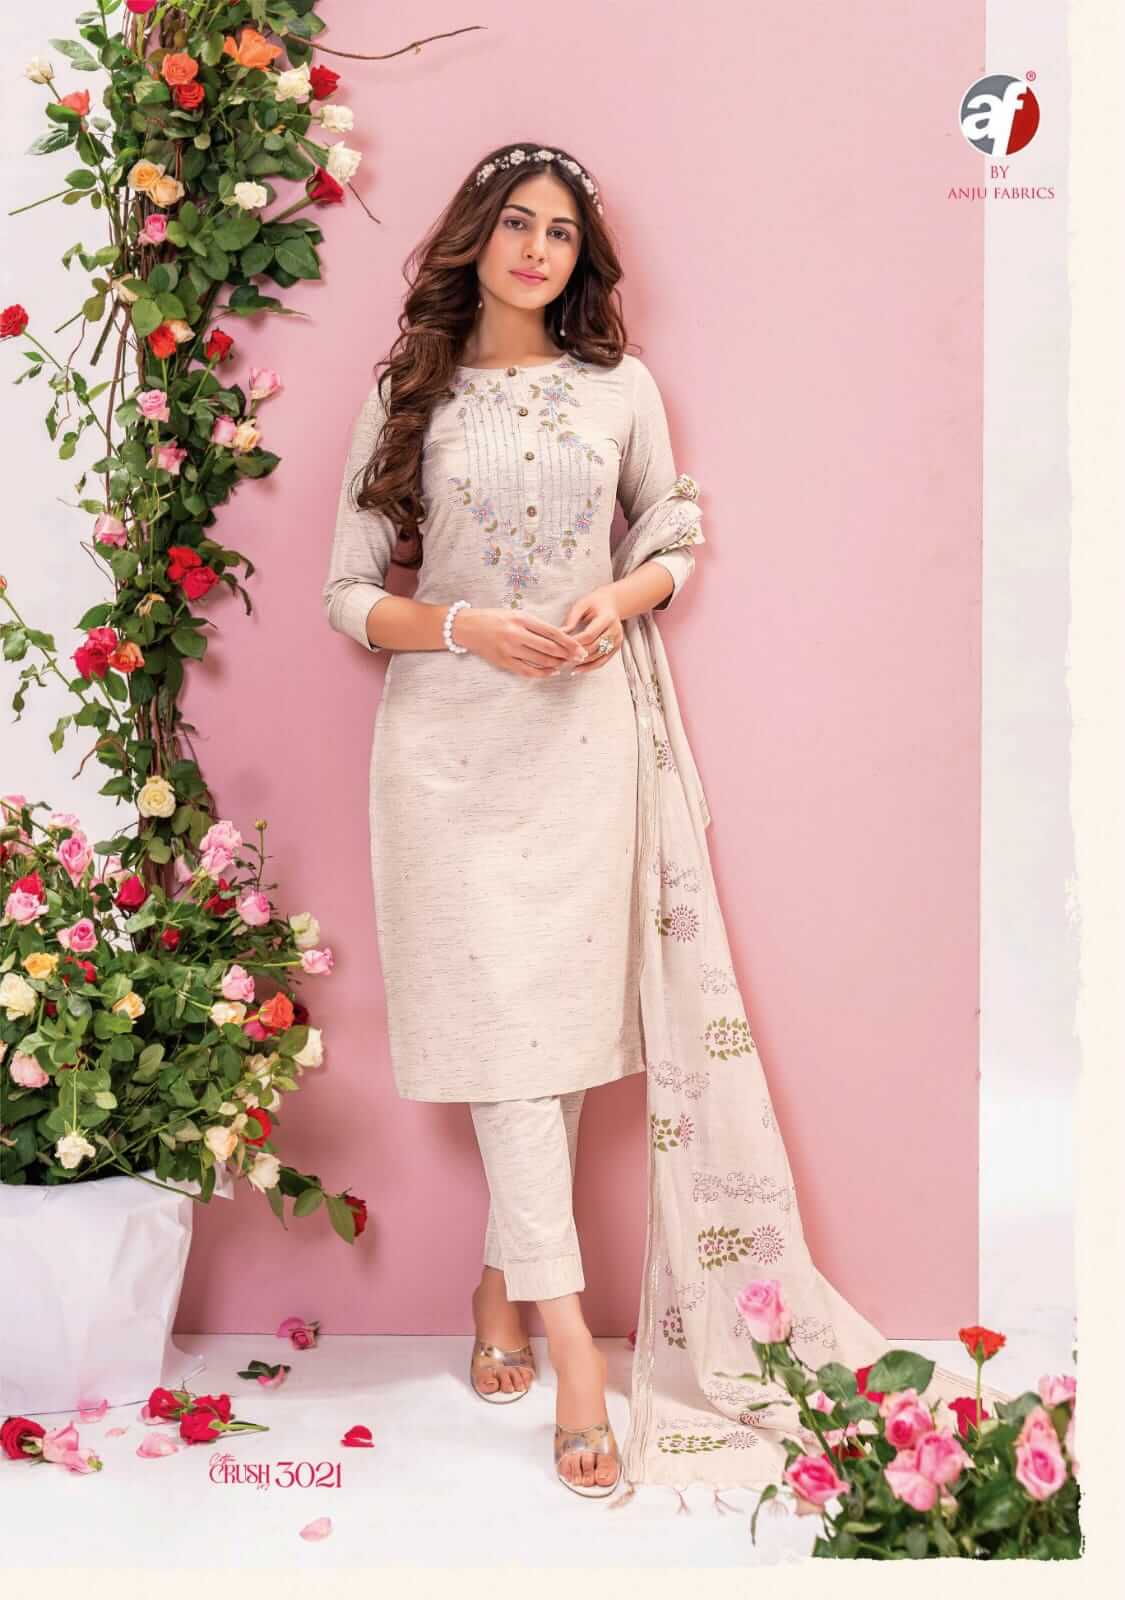 Af Cotton Crush vol 2 Top Bottom Dupatta Catalog in Whosale Price, Buy Af Cotton Crush vol 2 Top Bottom Dupatta Full Catalog in Whosale Price Online From Aarvee Creation